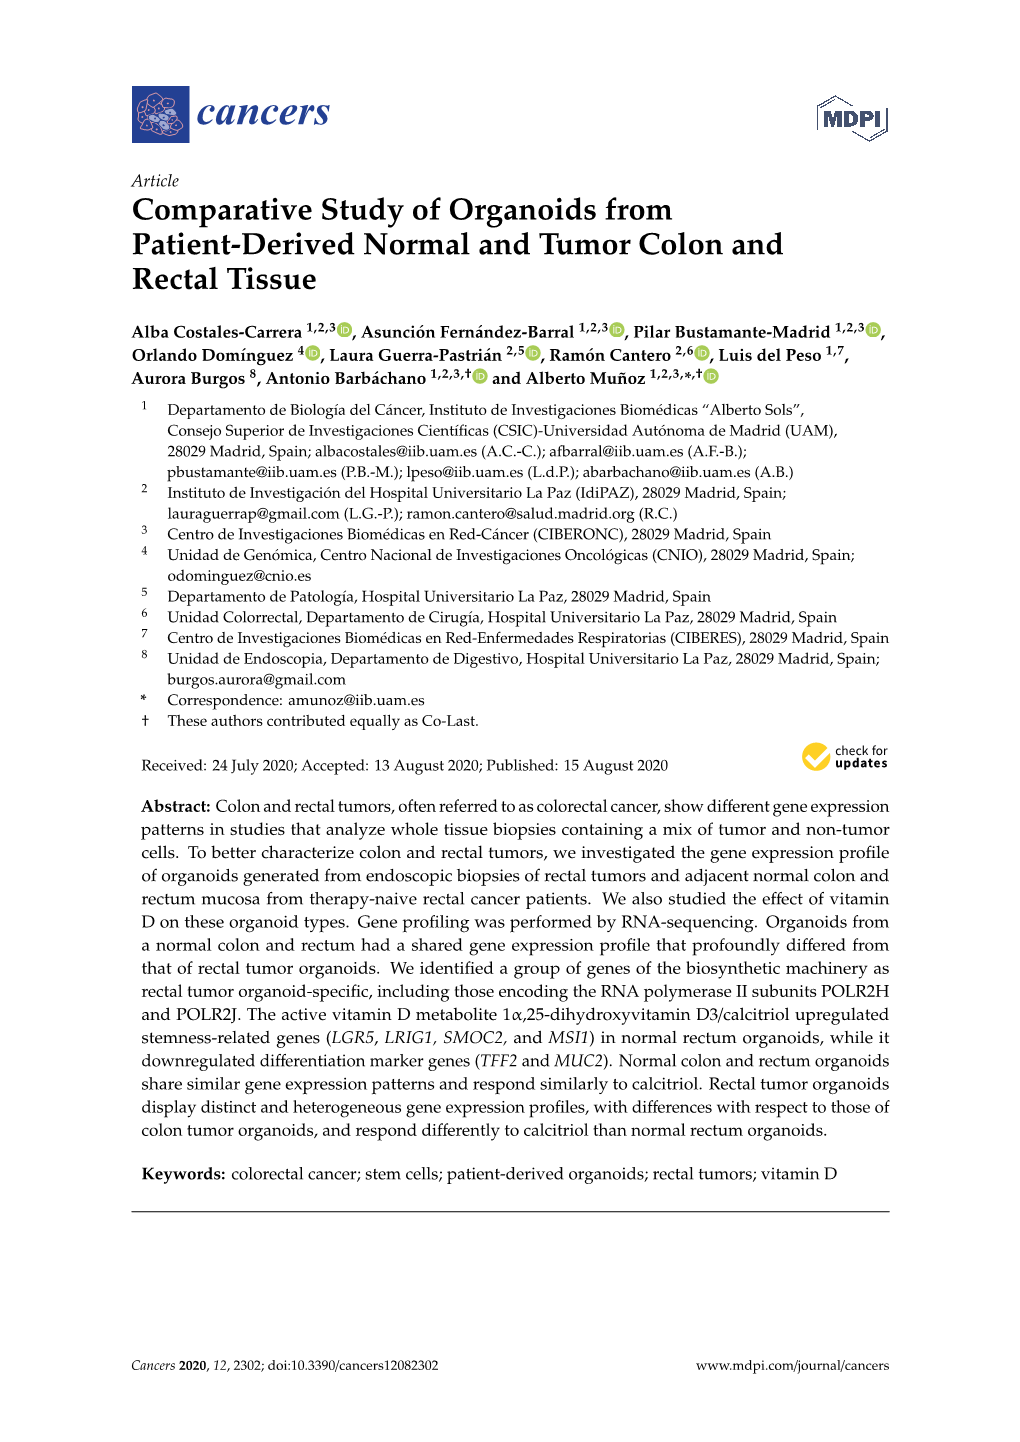 Comparative Study of Organoids from Patient-Derived Normal and Tumor Colon and Rectal Tissue